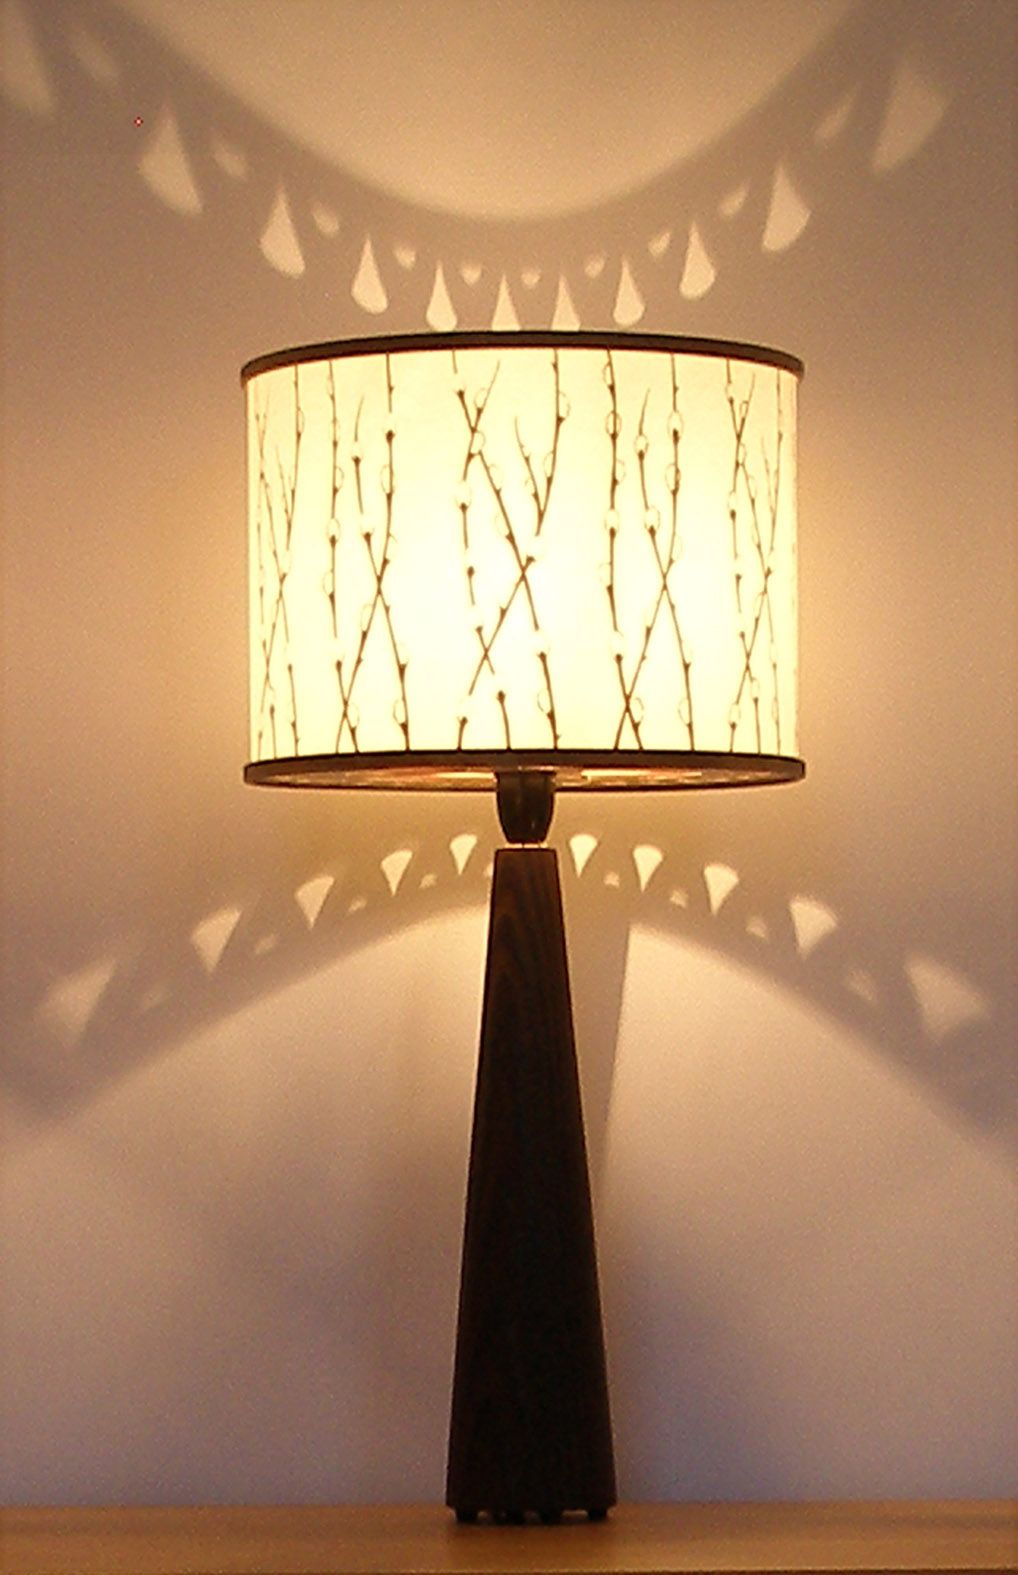 Willow table lamp